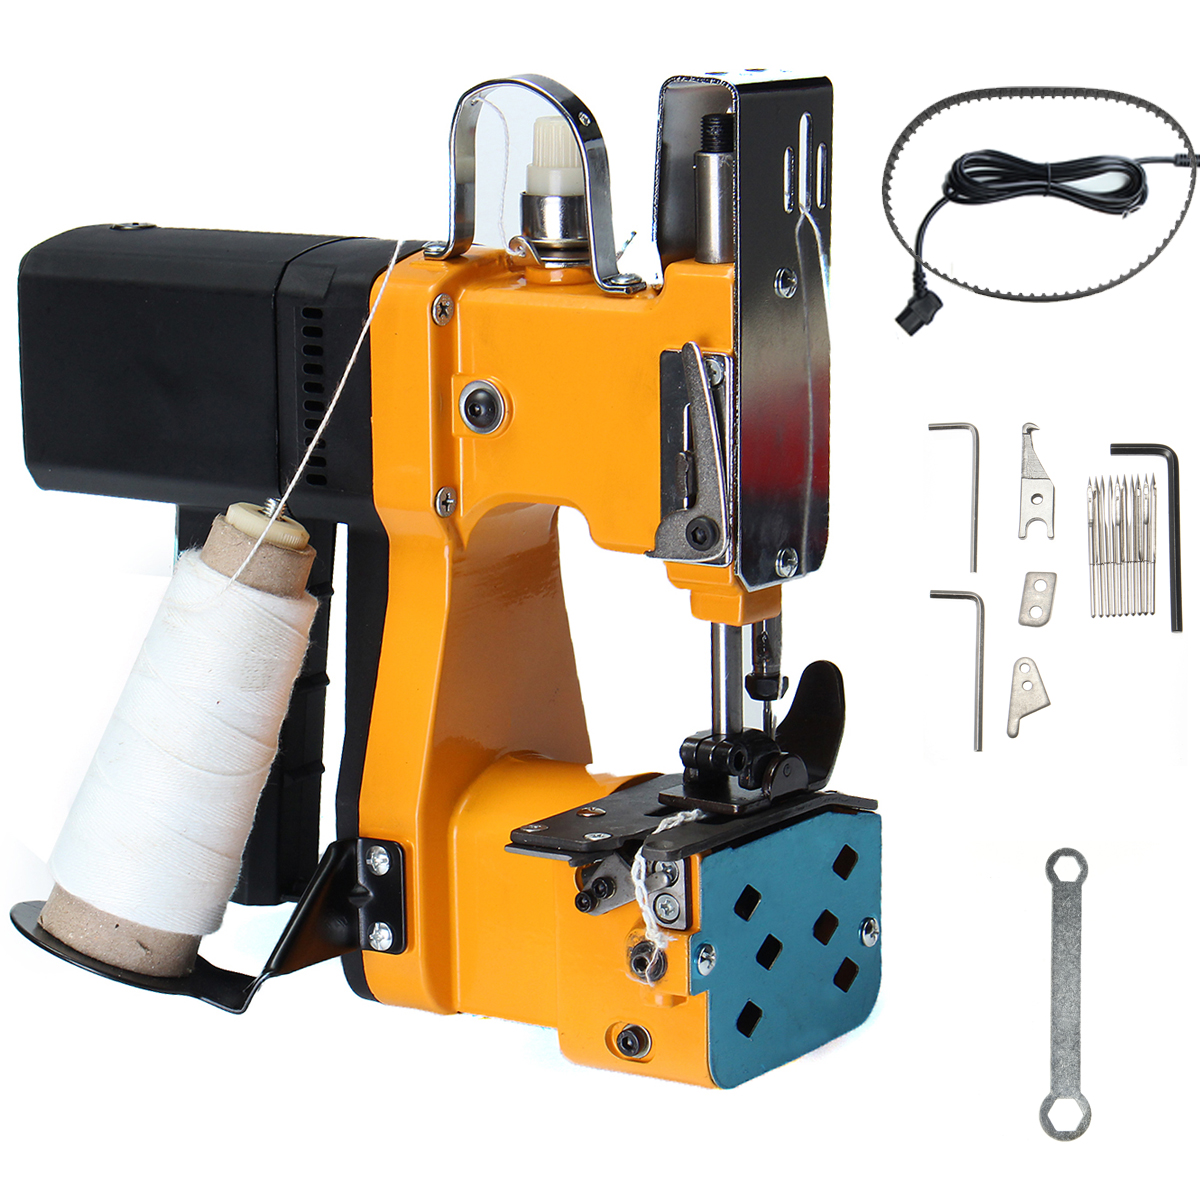 220V-Portable-Electric-Sewing-Machine-Seal-Ring-Machines-Industrial-Cloth-Tools-1182203-1